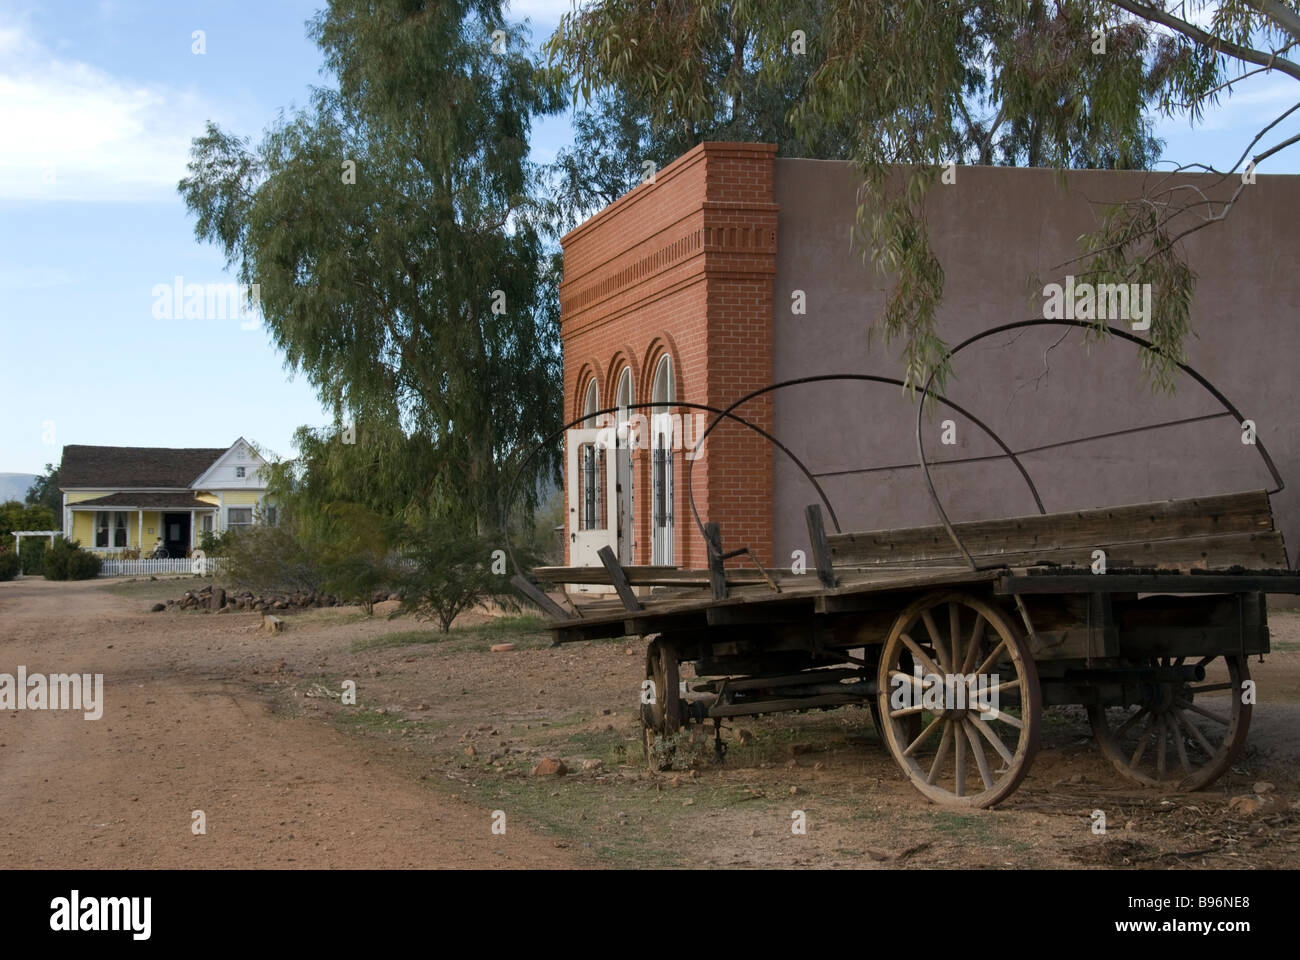 Pioneer Living History Village with an Old Western Bank and an Old Western Wagon, located in Phoenix, Arizona, USA. Od West Homestead is down the road. Stock Photo